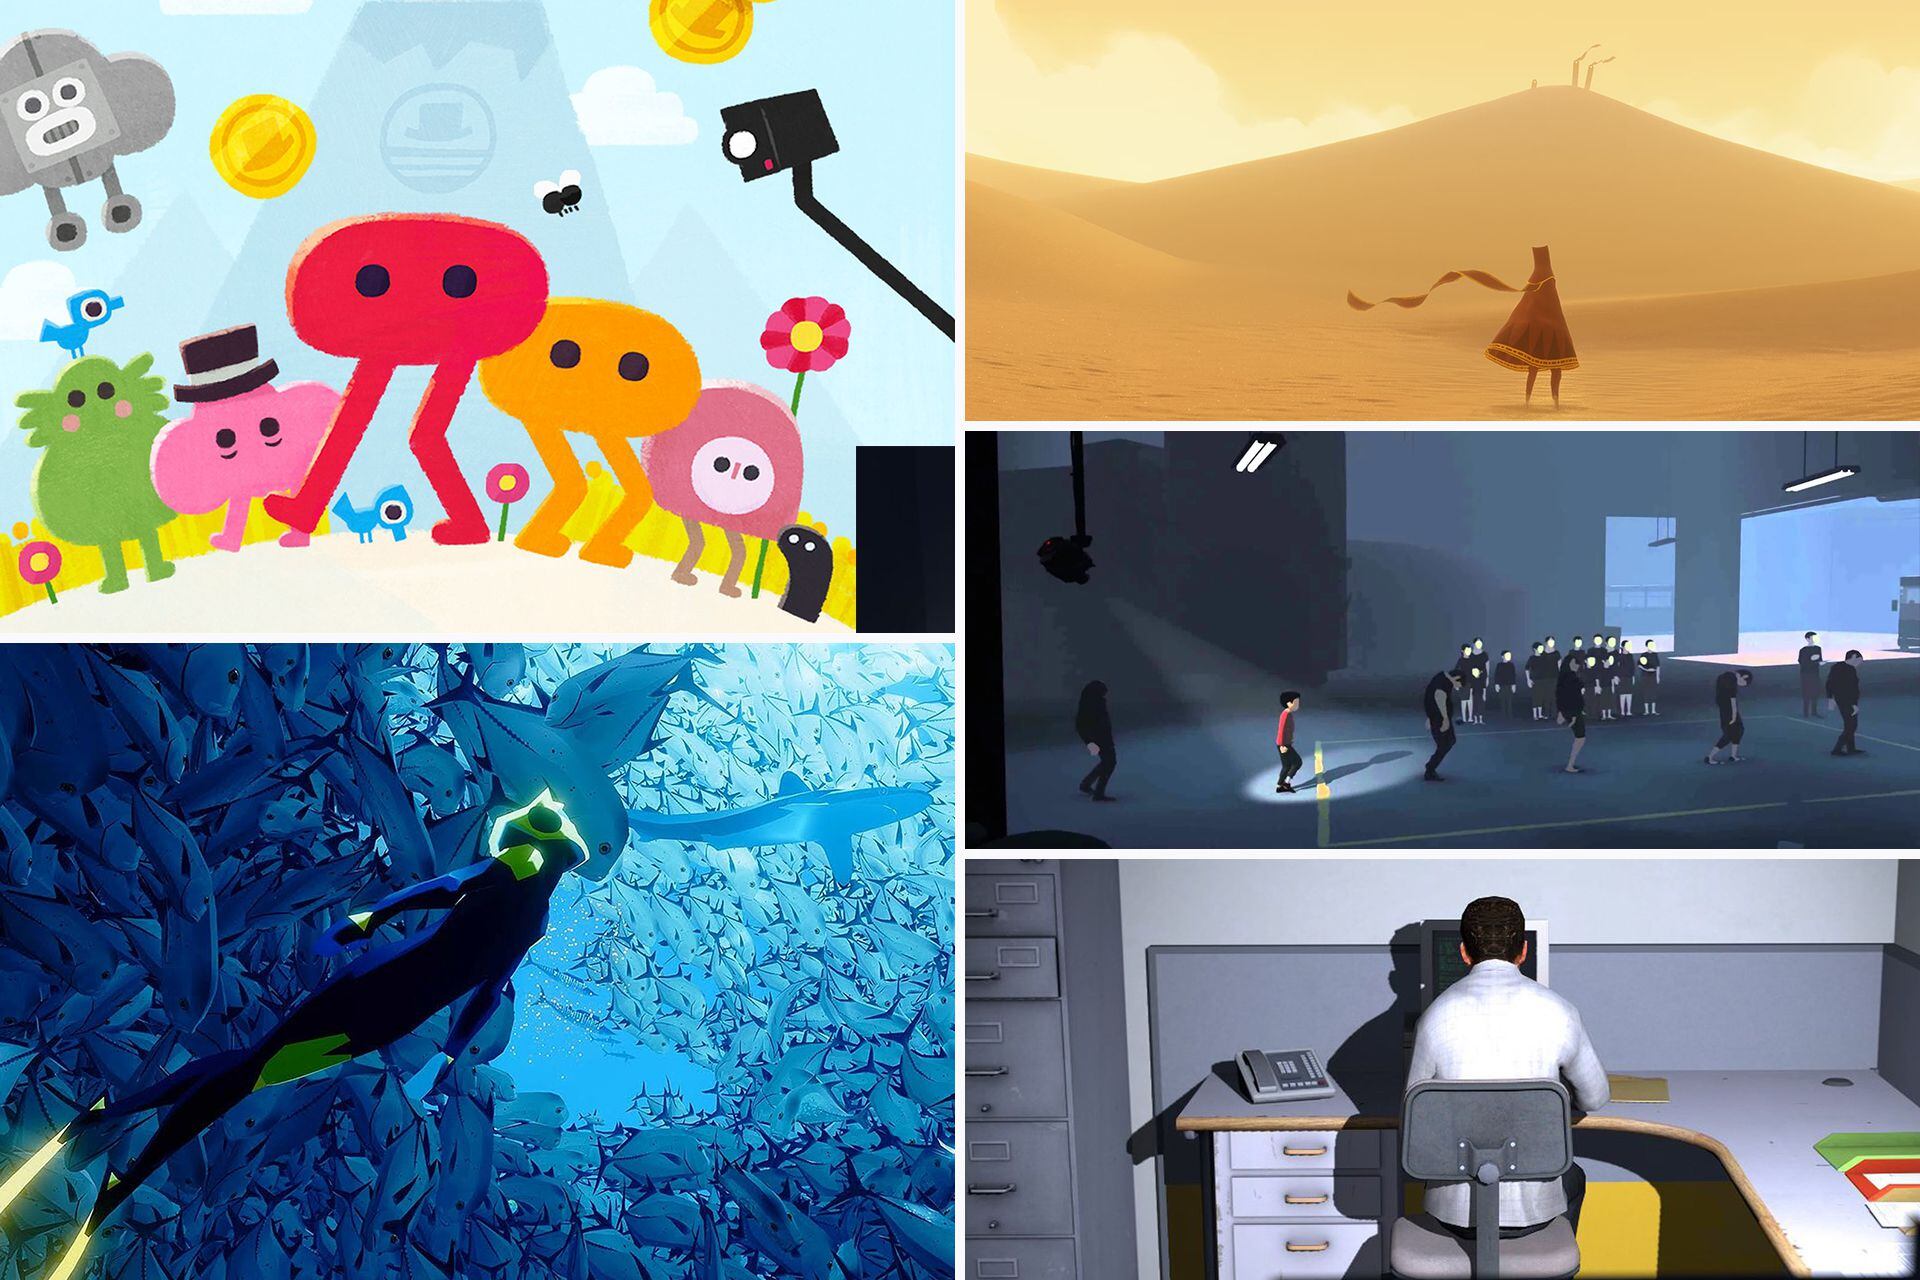 10 Best Short PS5 Games You Should Check Out - Cultured Vultures